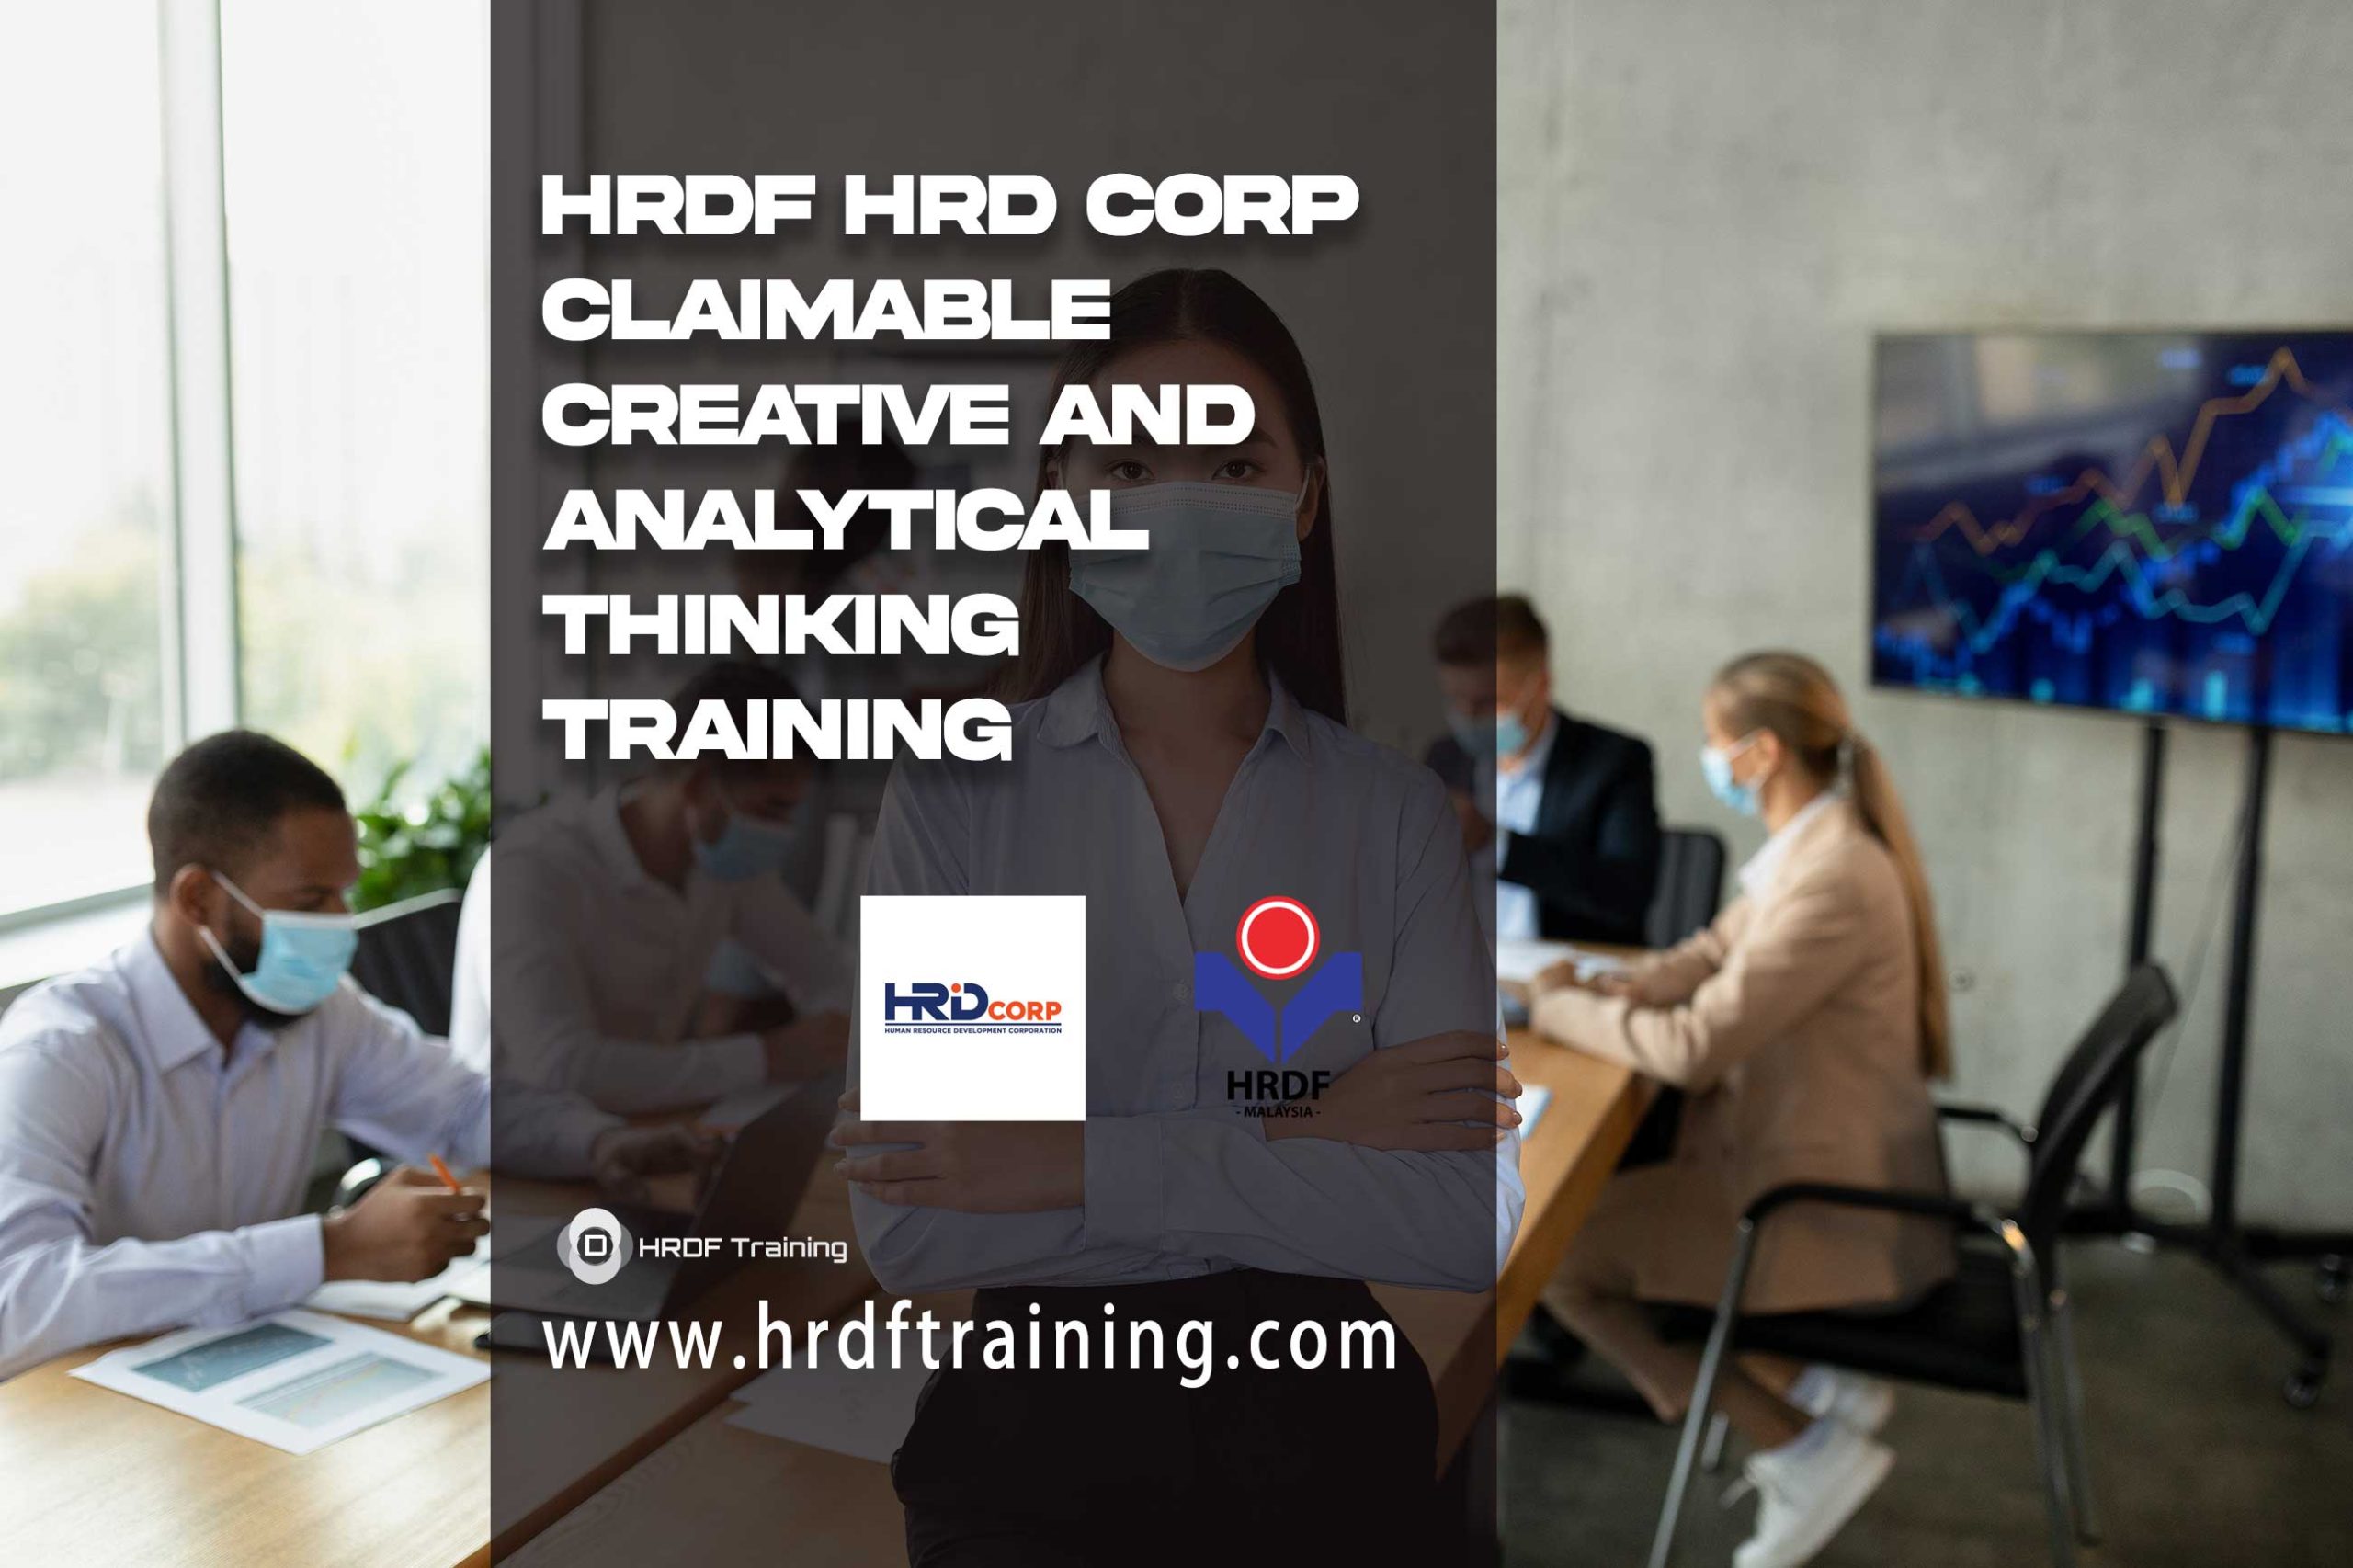 HRDF-HRD-Corp-Claimable-Creative-And-Analytical-Thinking-Training